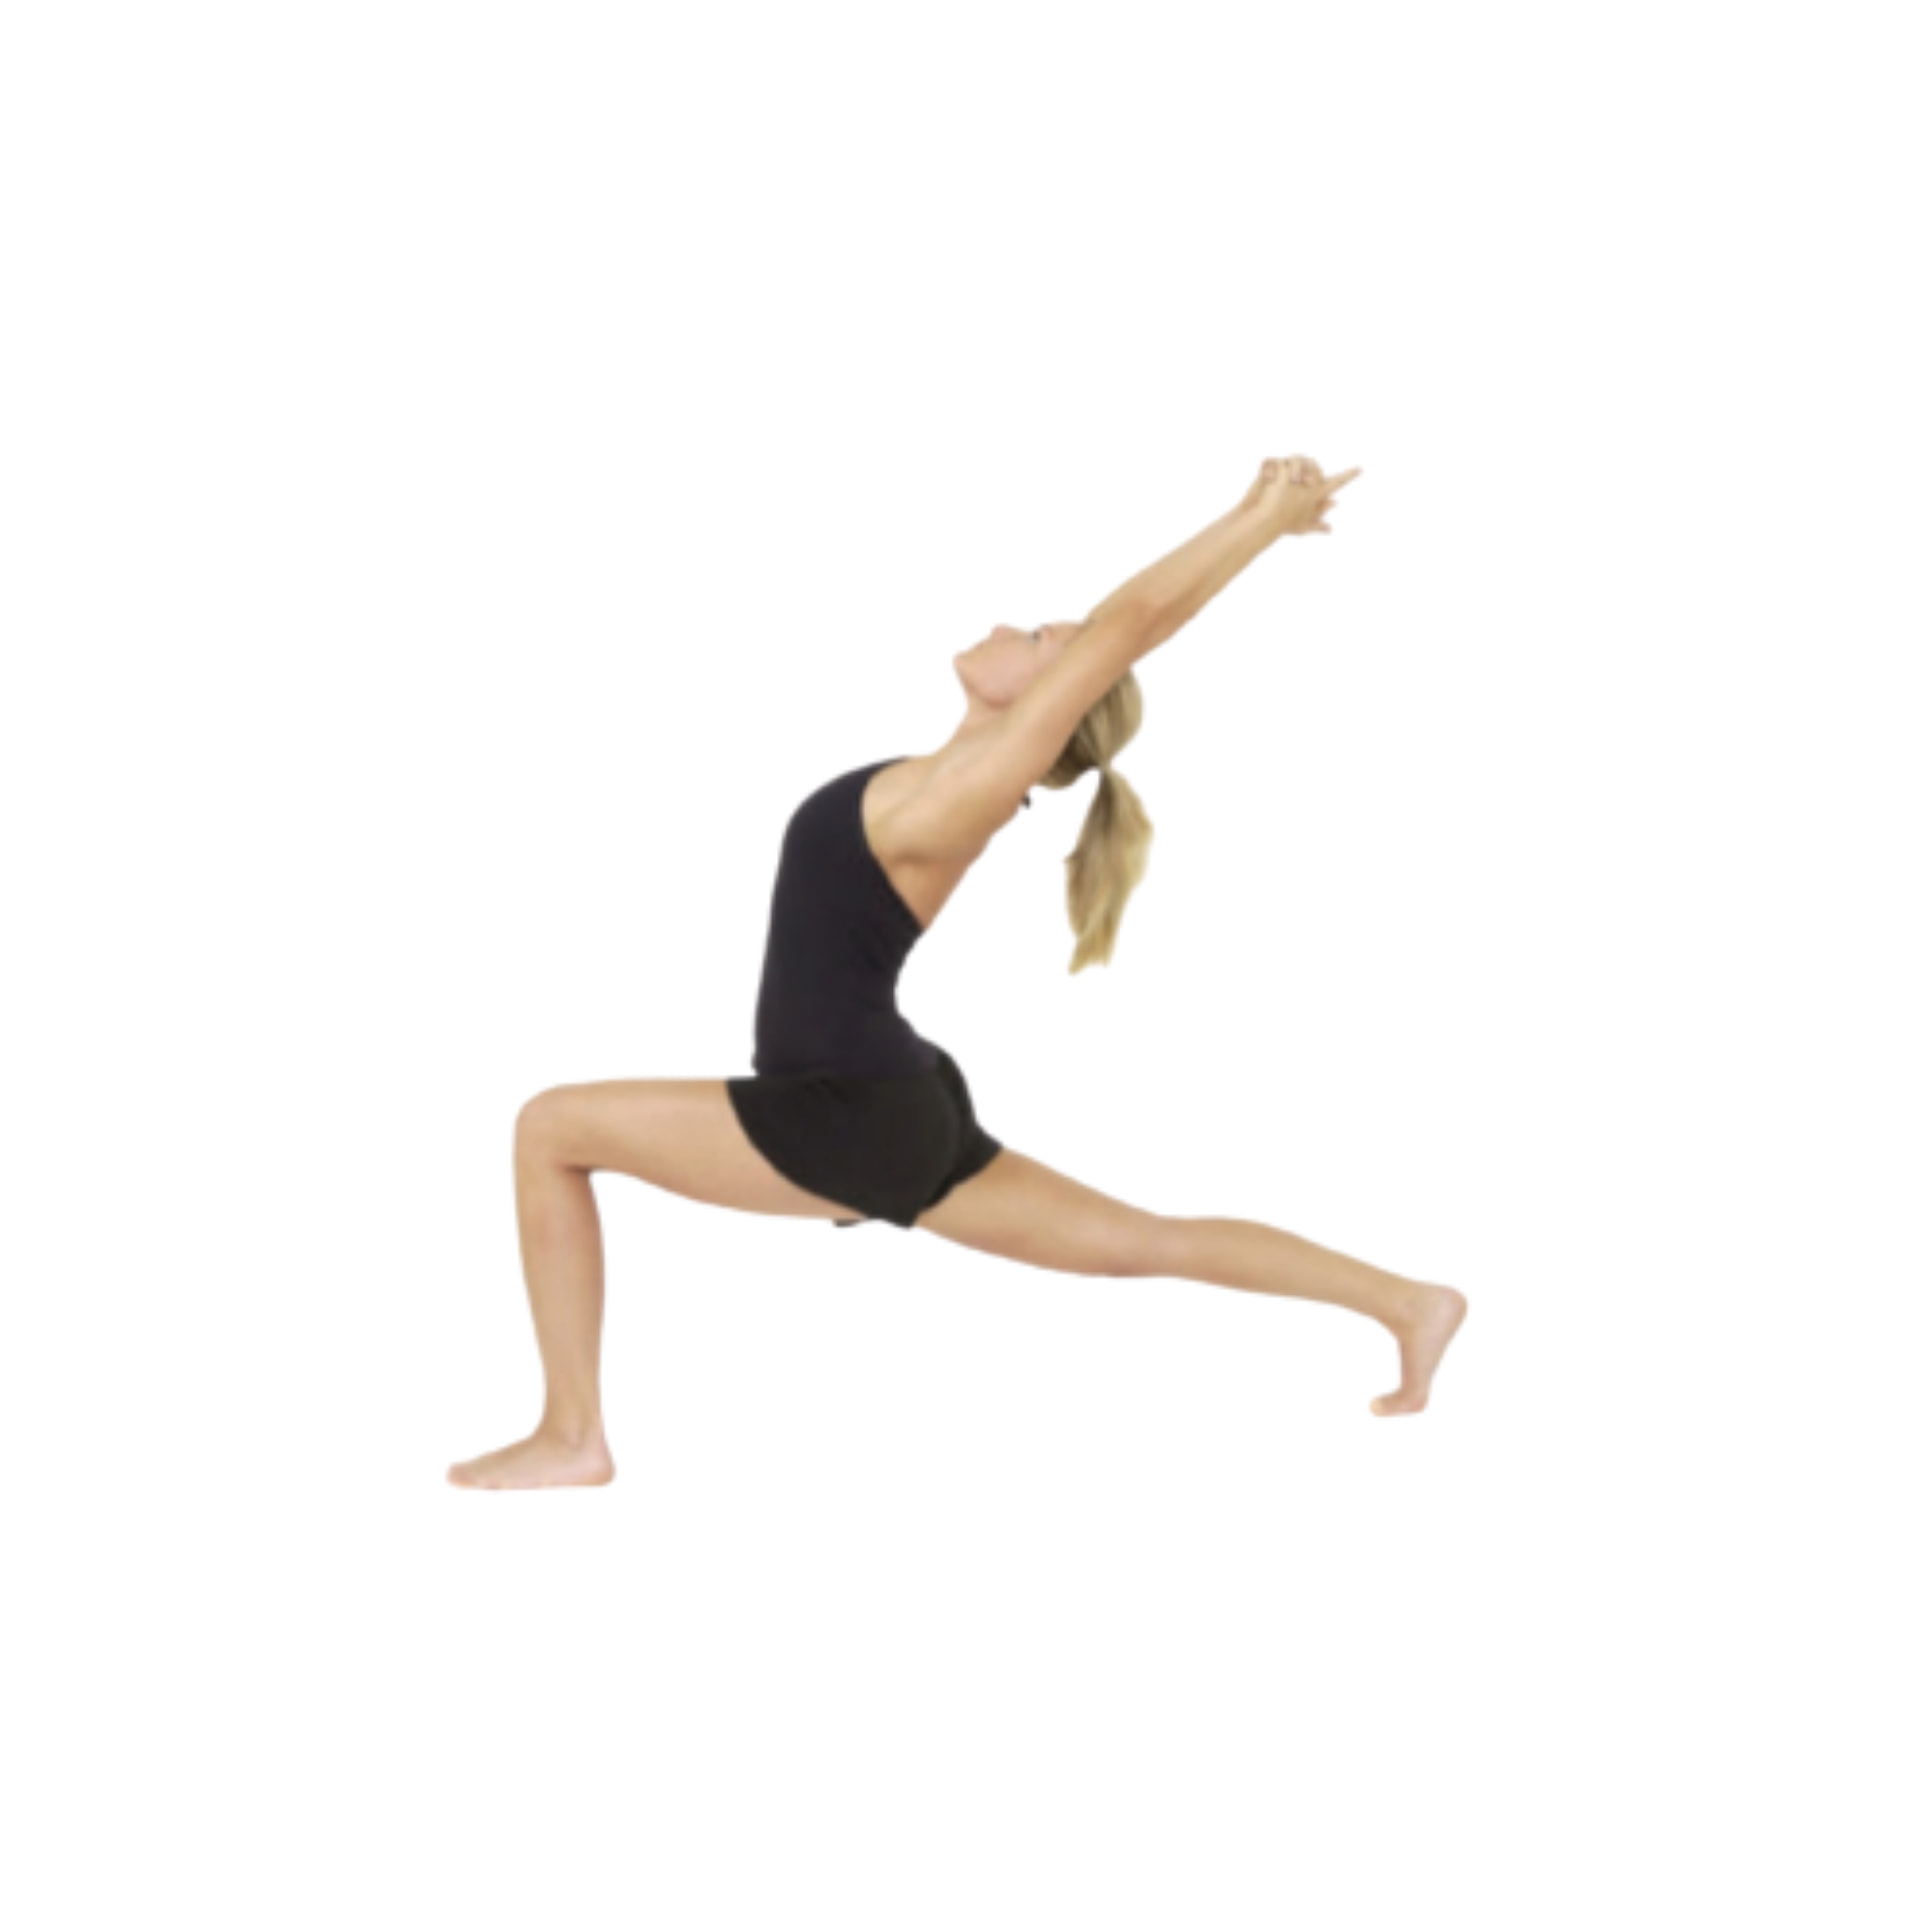 What is Revolved Crescent Lunge? - Definition from Yogapedia